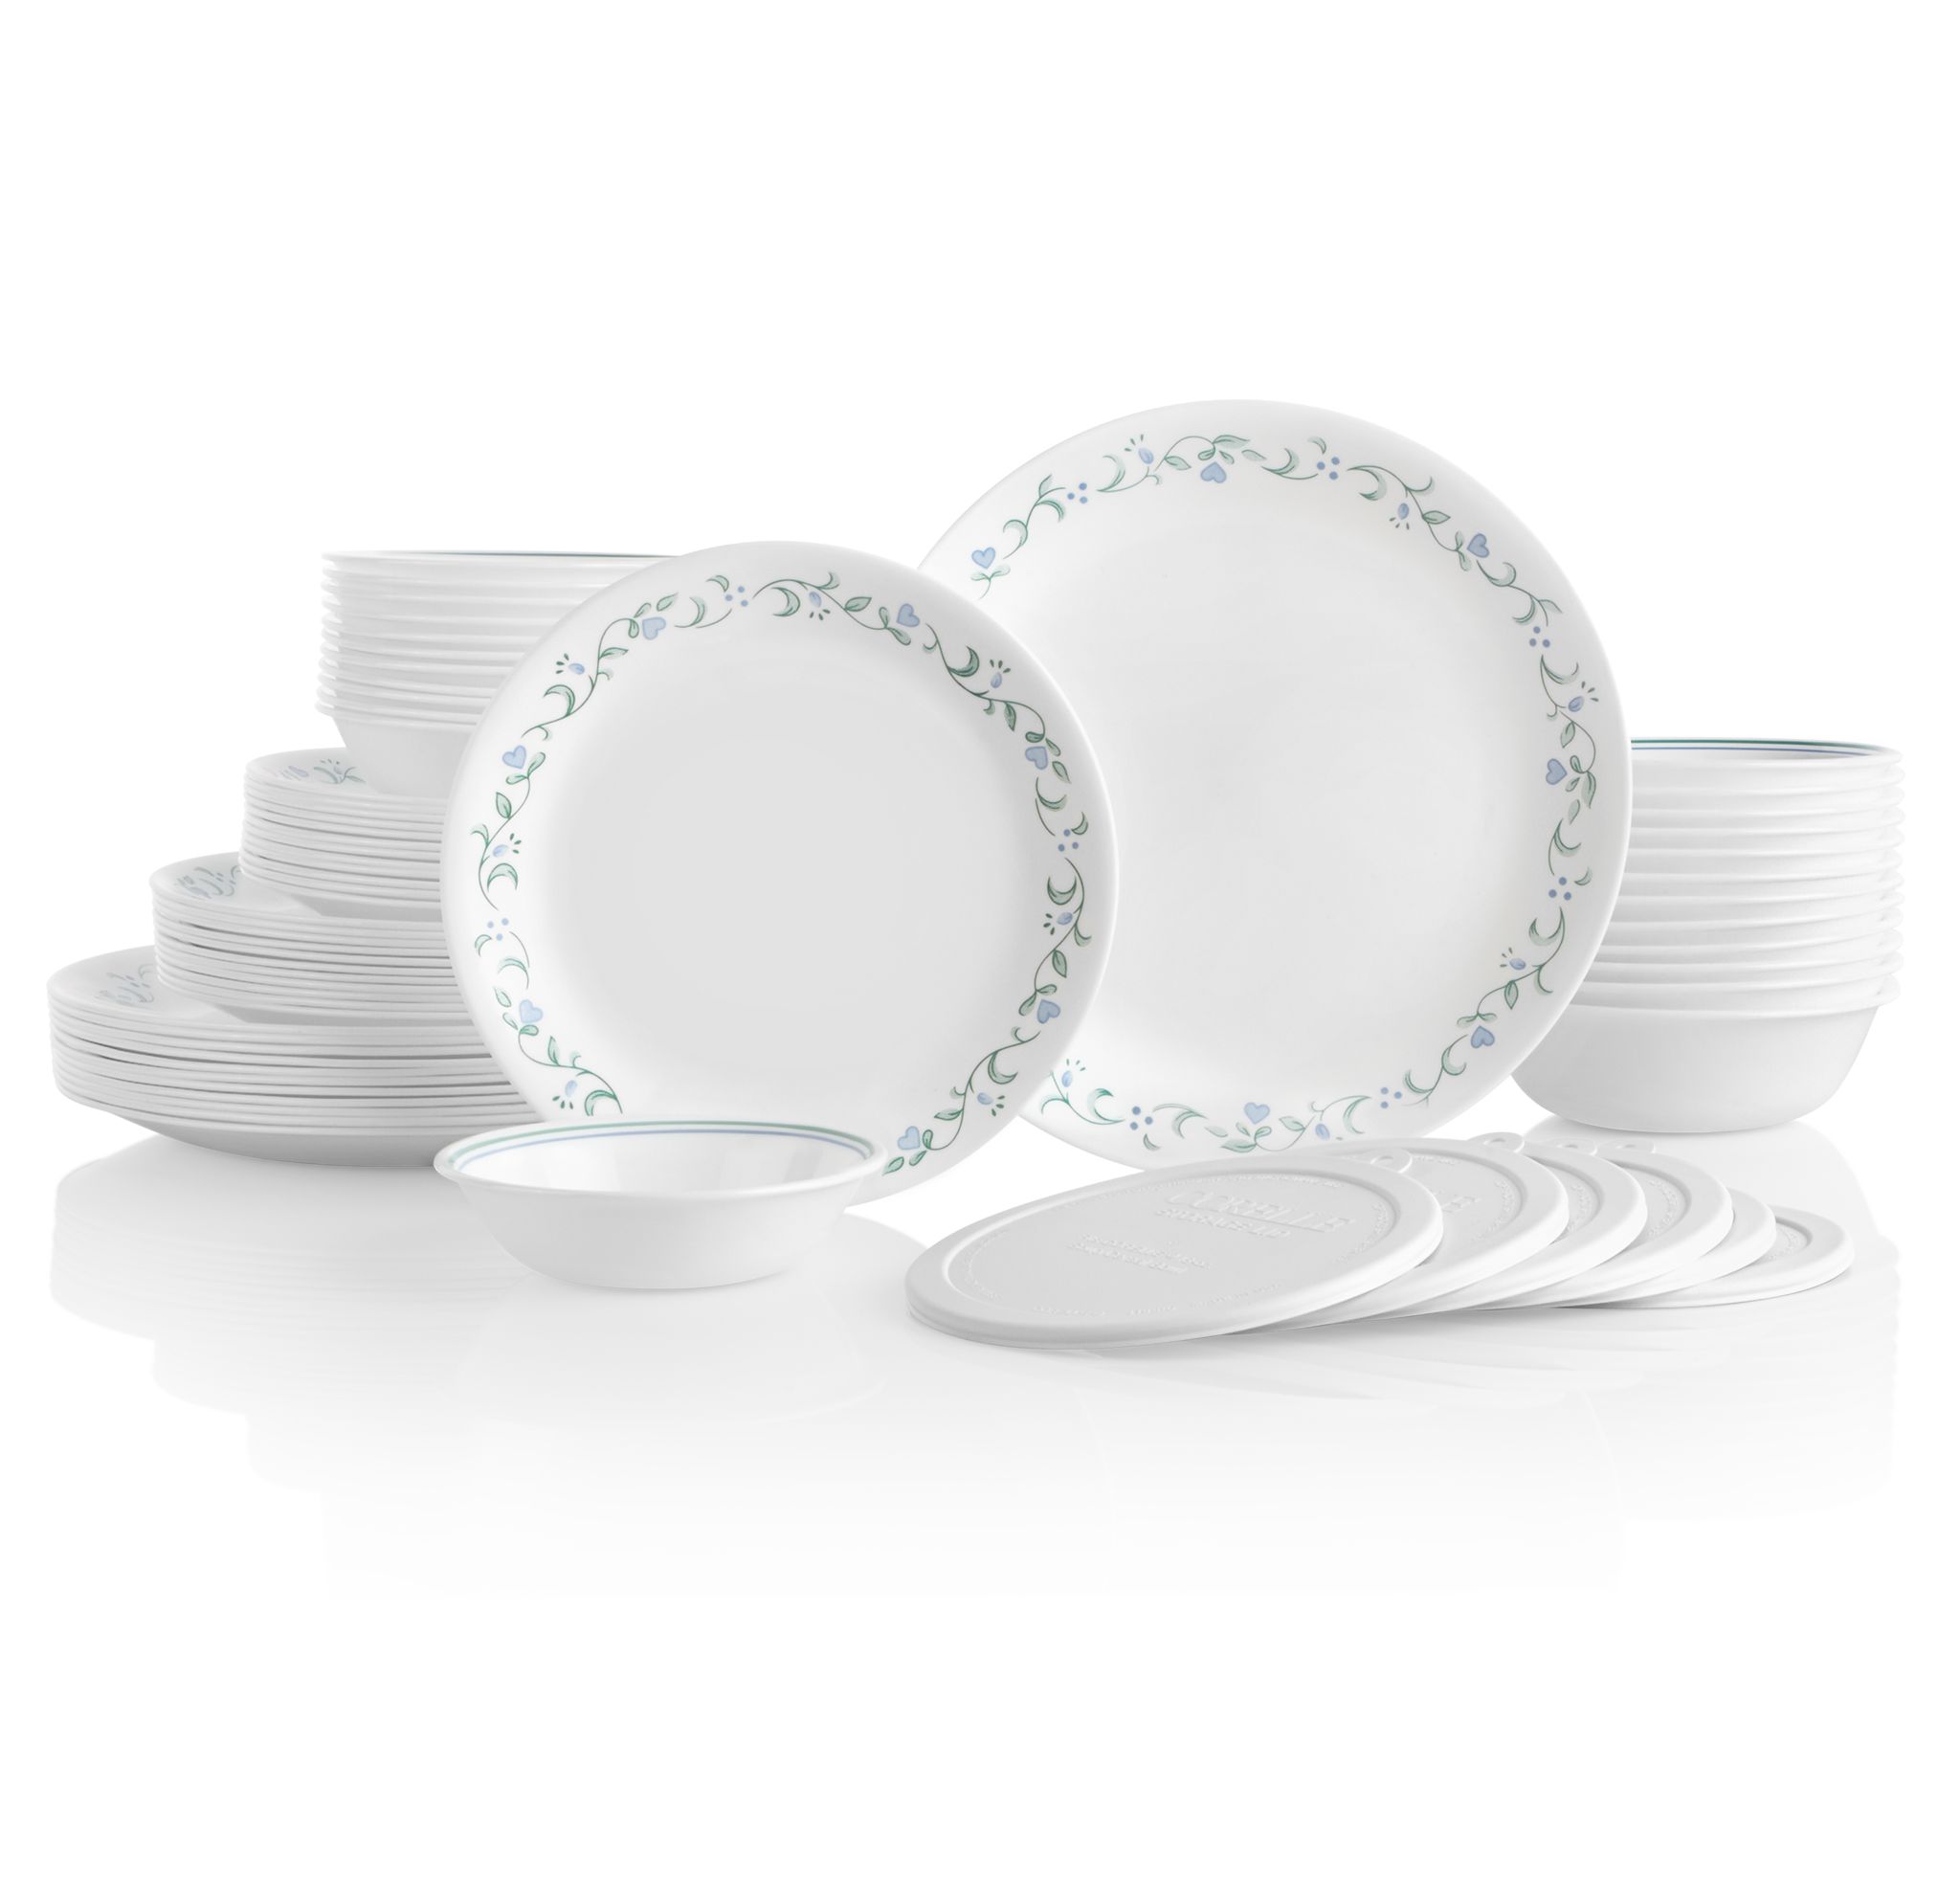 Corelle Country Cottage, White and Green Round 12-Piece Dinnerware Set